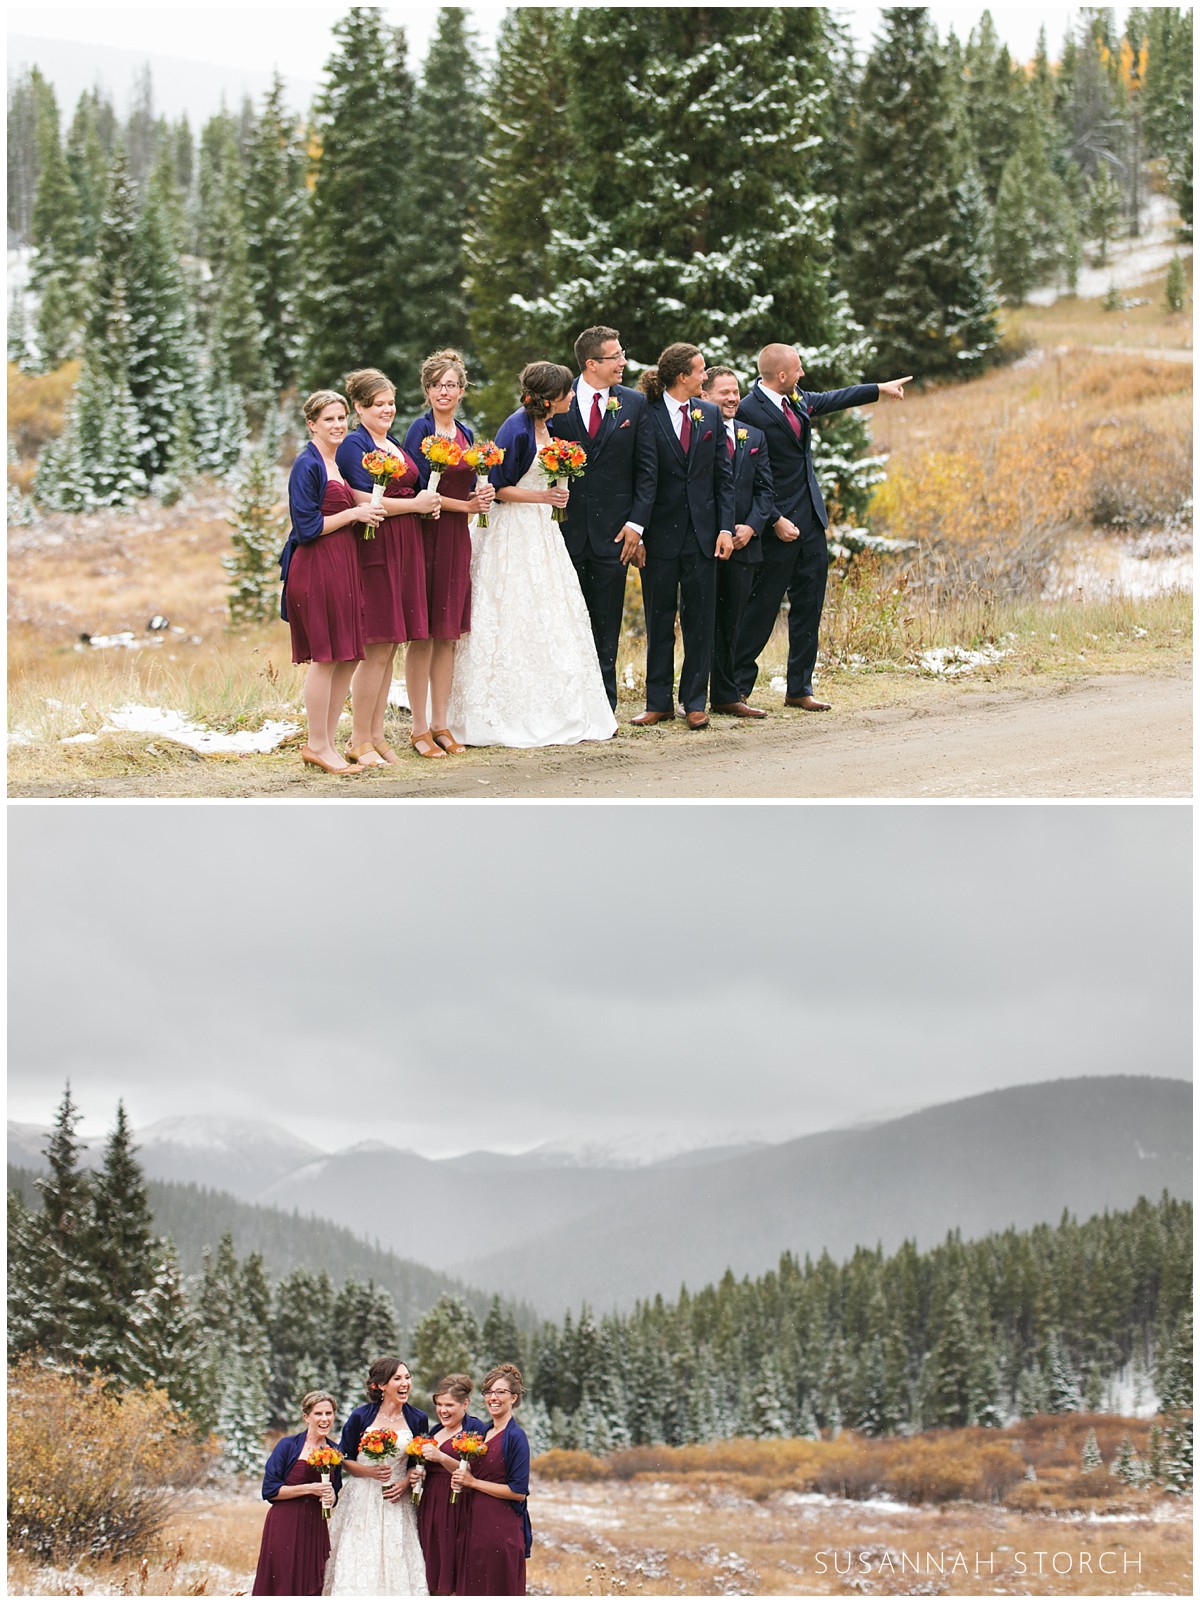 two images of a colorado wedding bridal party standing in front of snow-covered pine trees